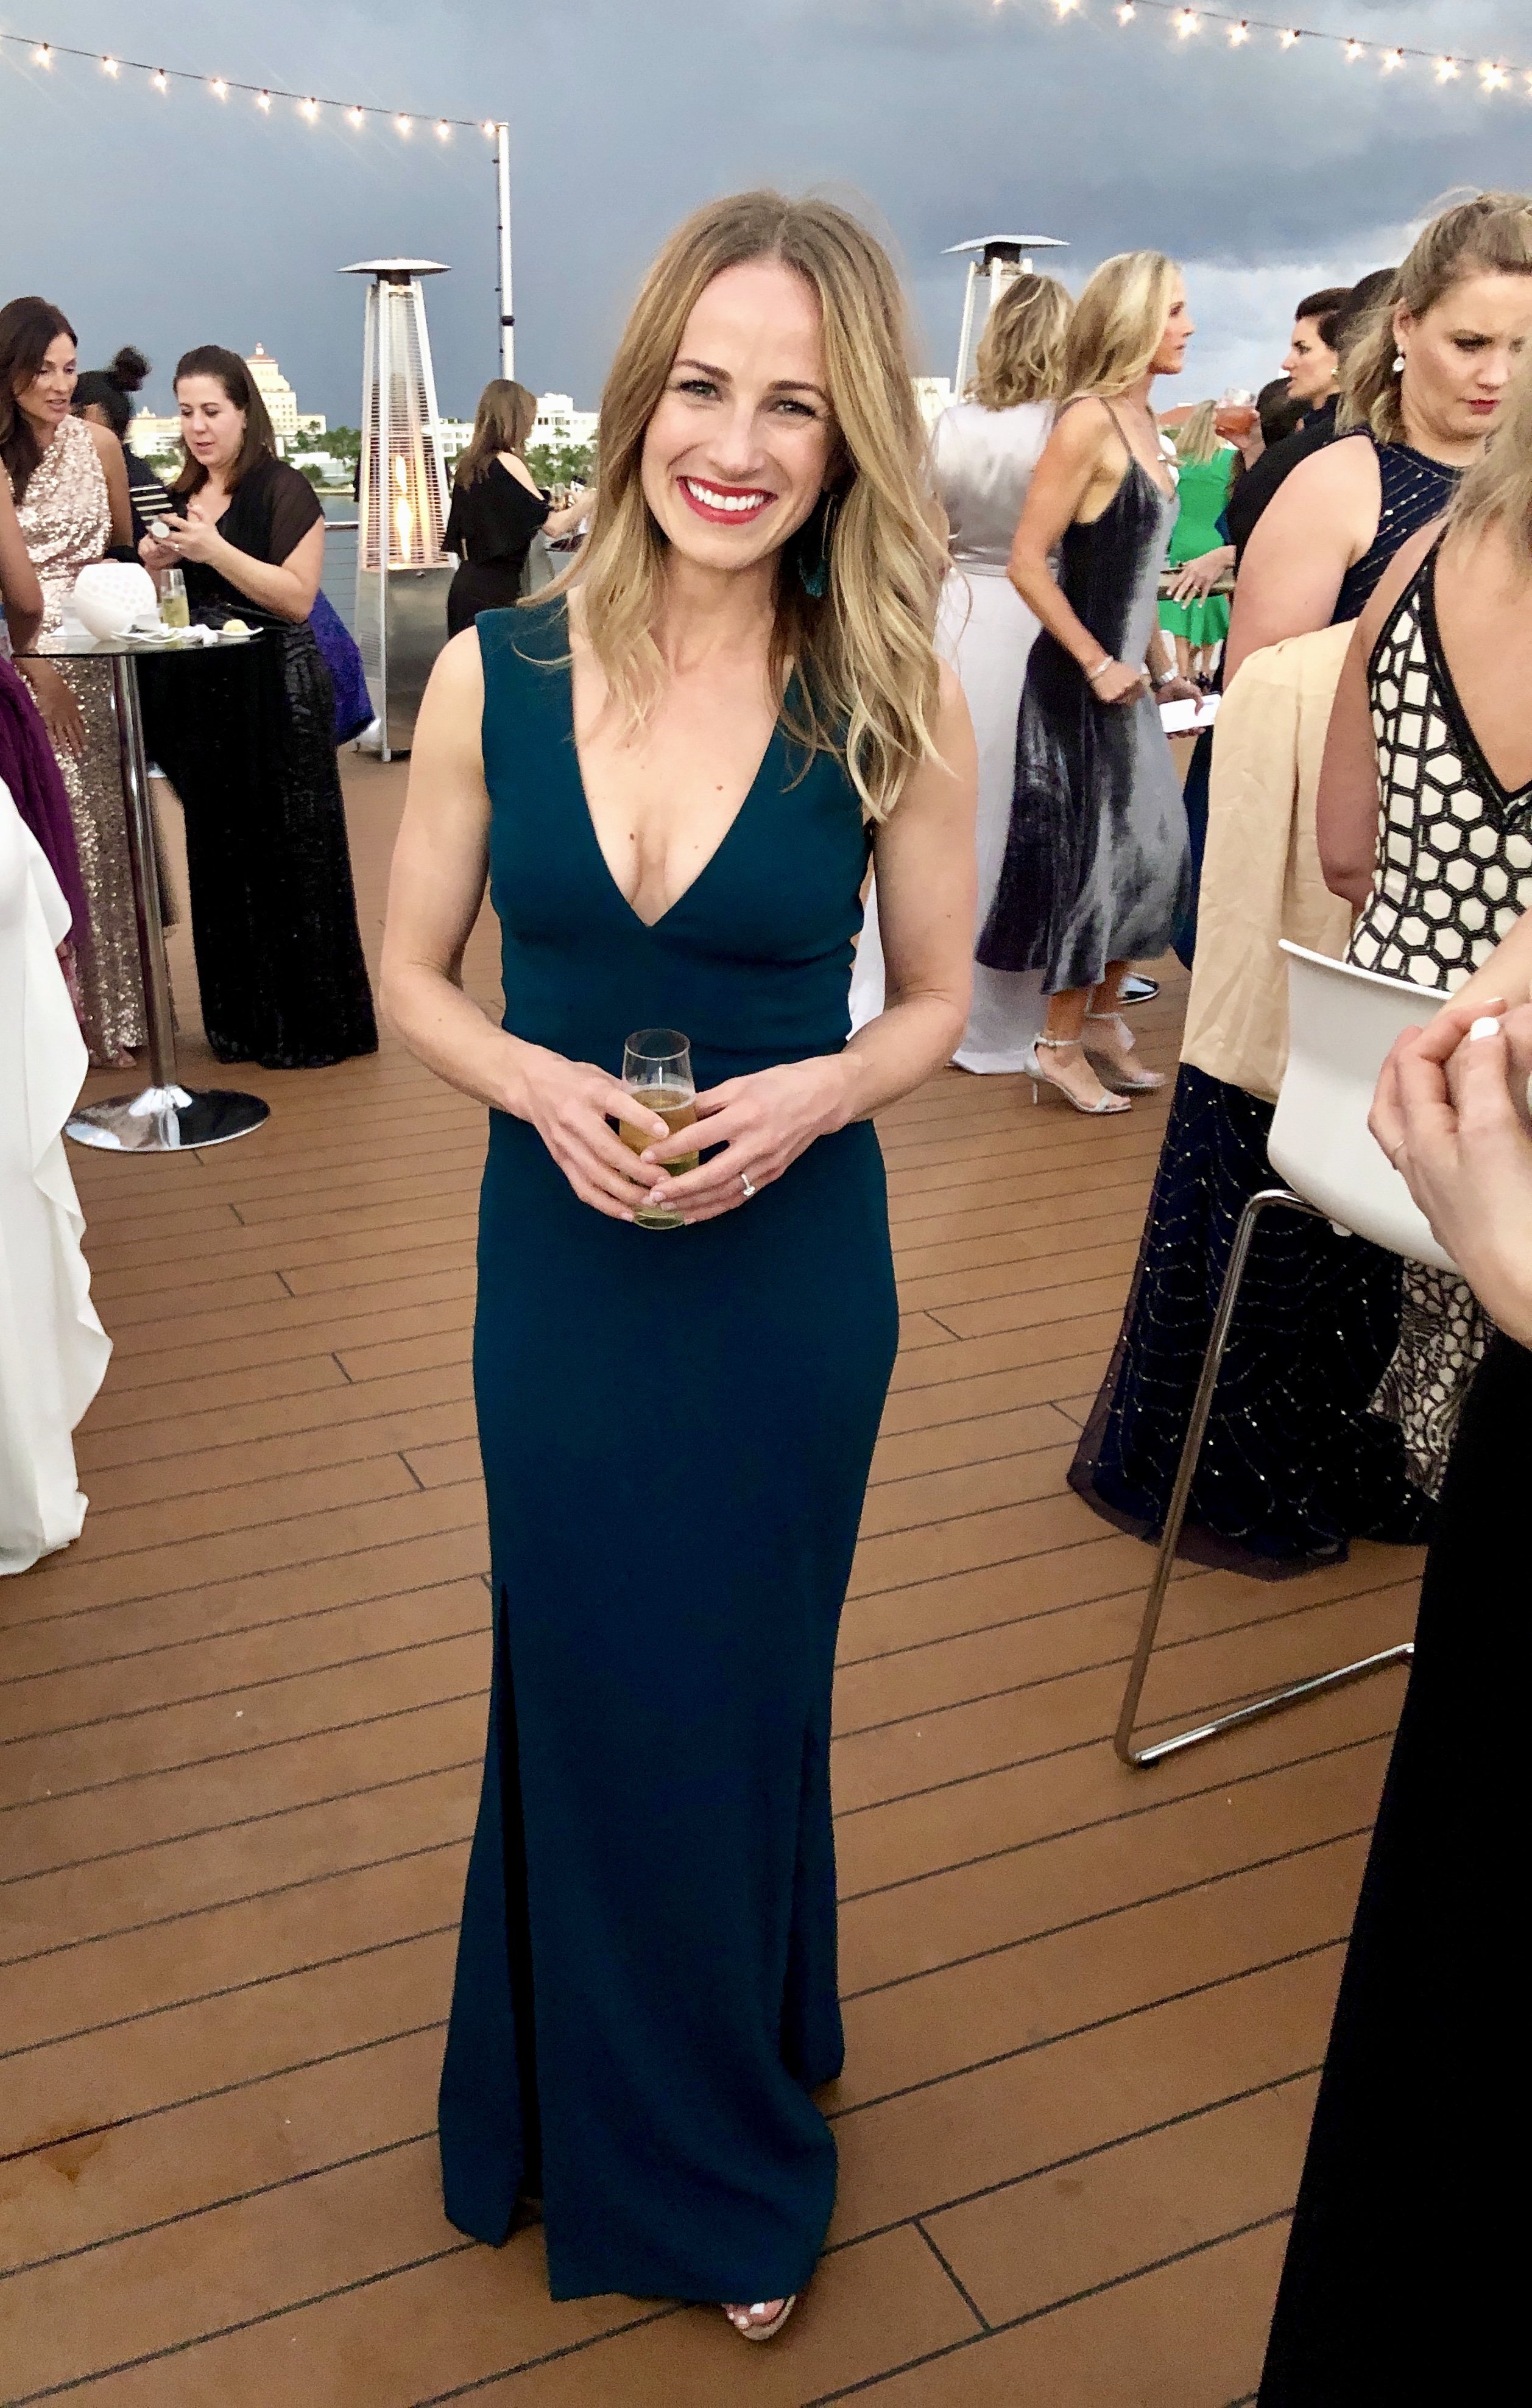 A flattering gown for black tie events